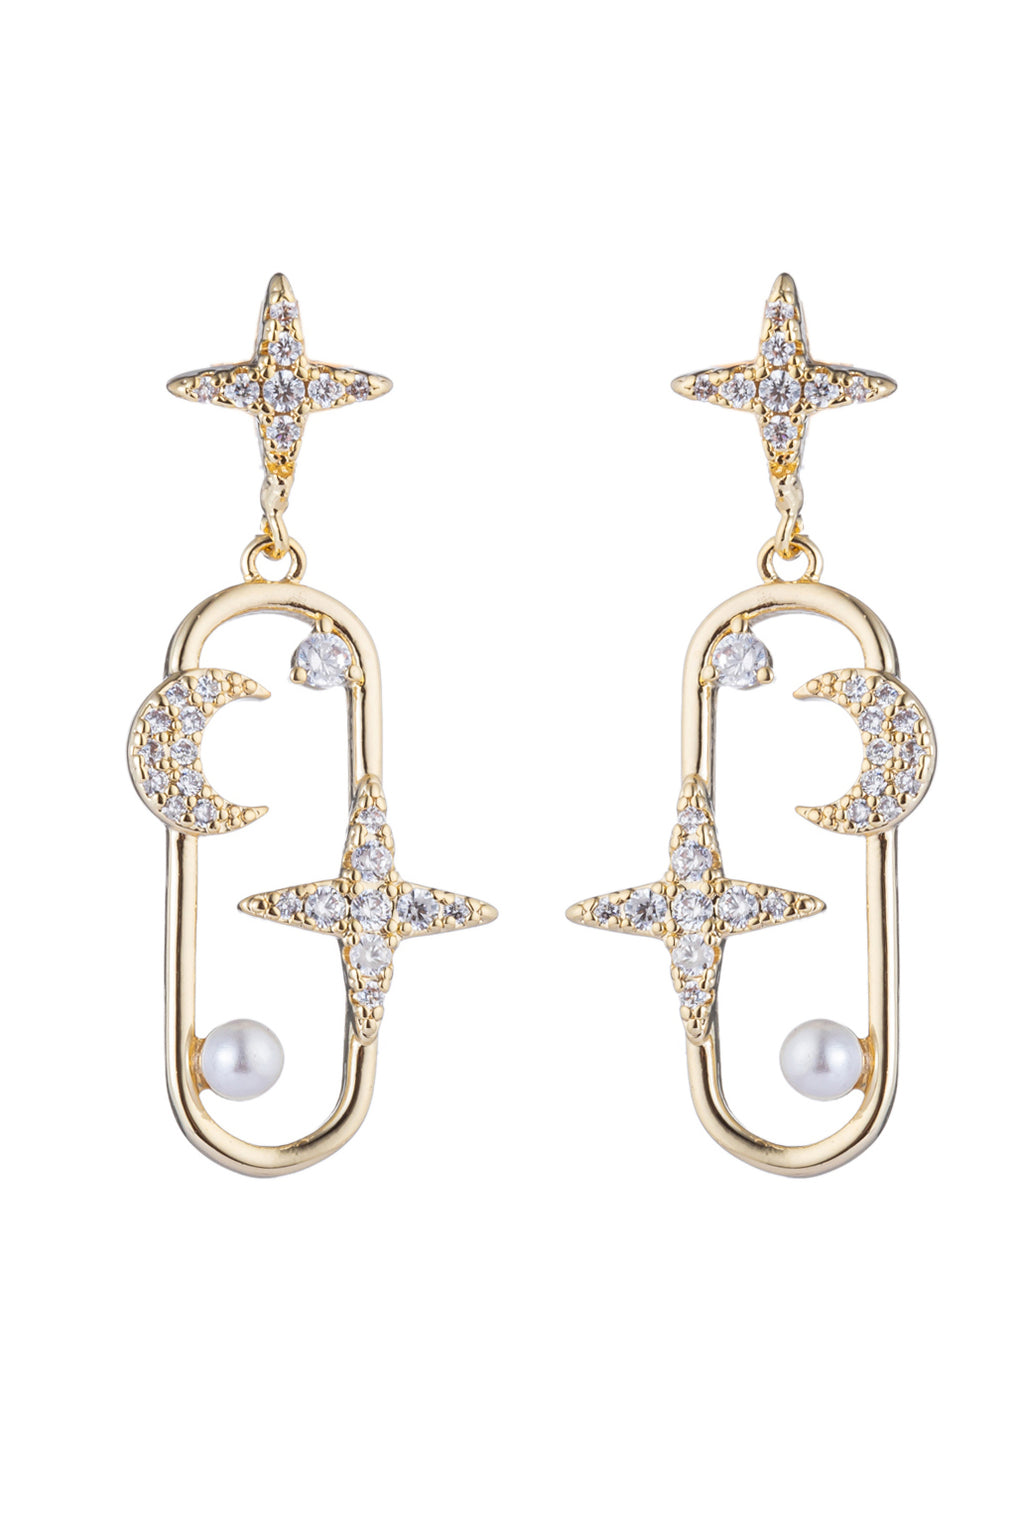 Star & moon paperclip drop earrings studded with CZ crystals.